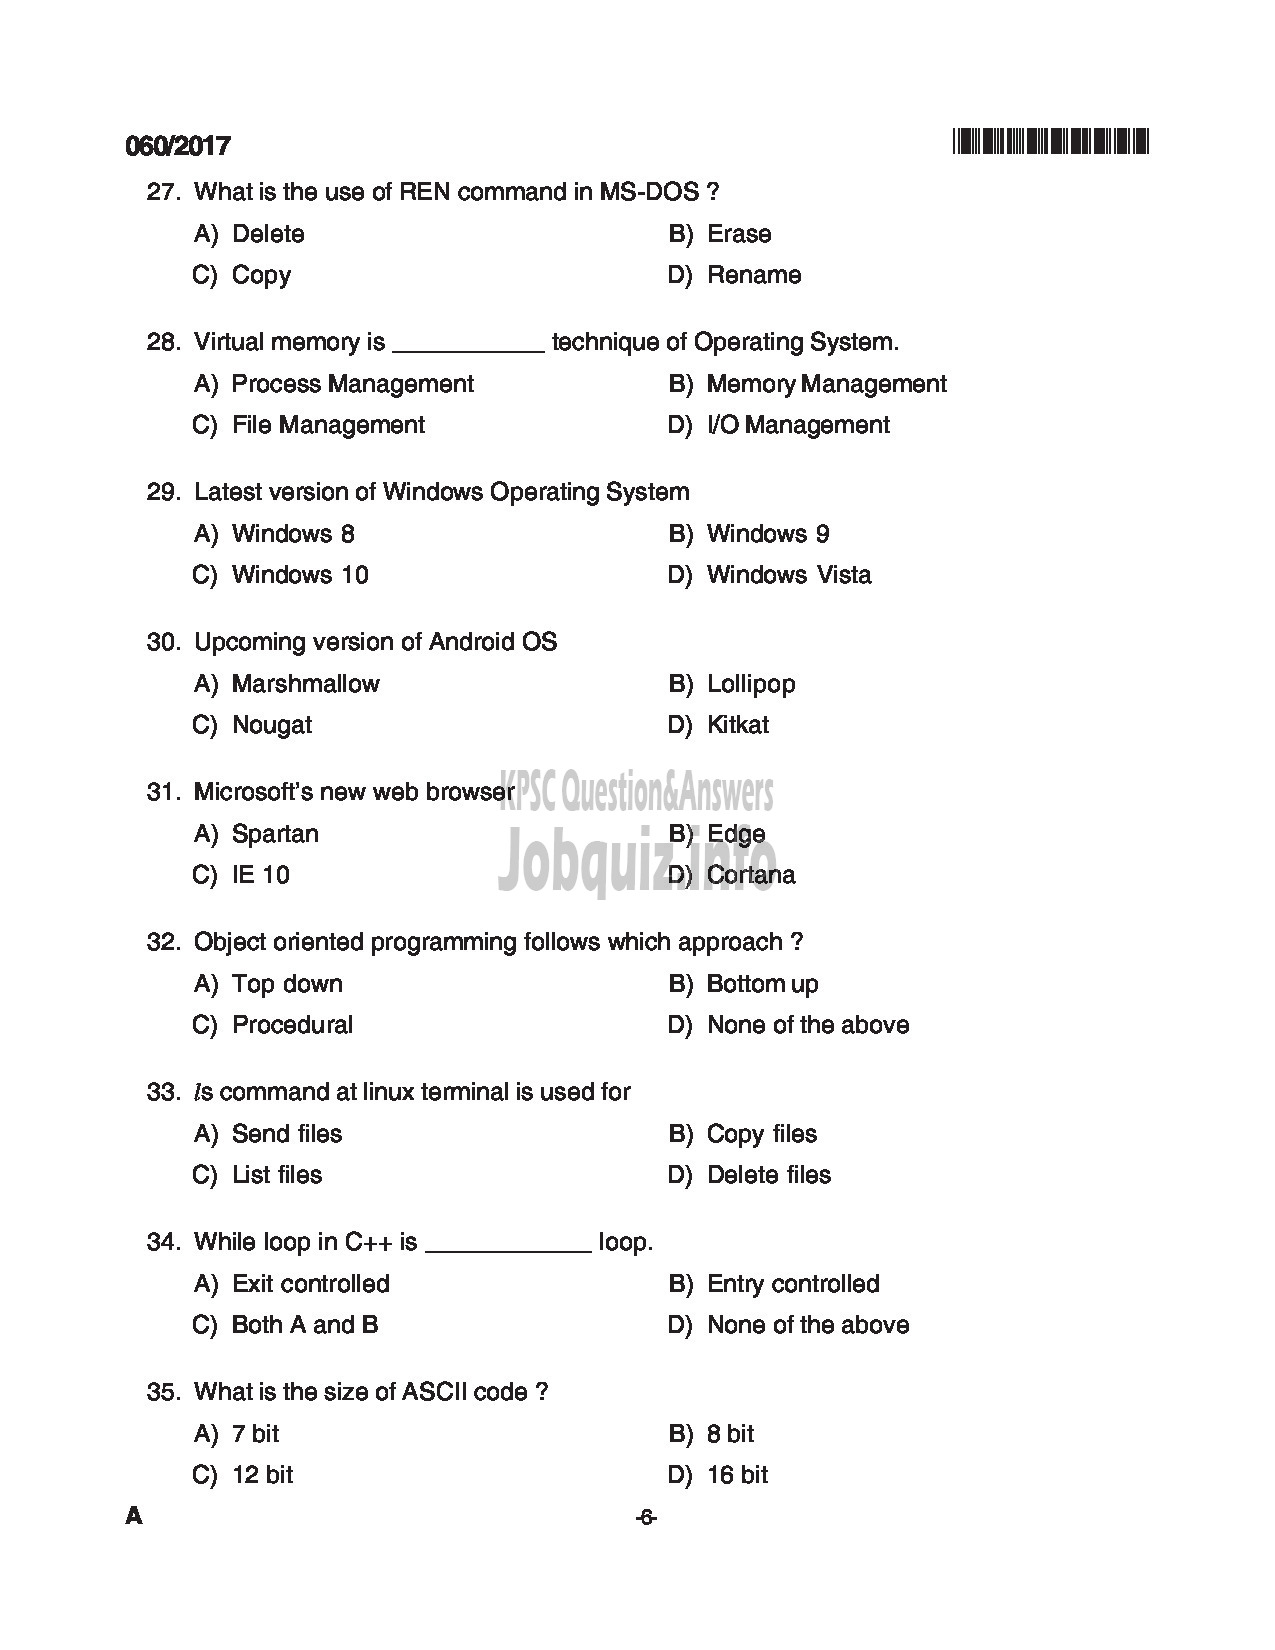 Kerala PSC Question Paper - TRADESMAN COMPUTER ENGINEERING TECHNICAL EDUCATION QUESTION PAPER-6